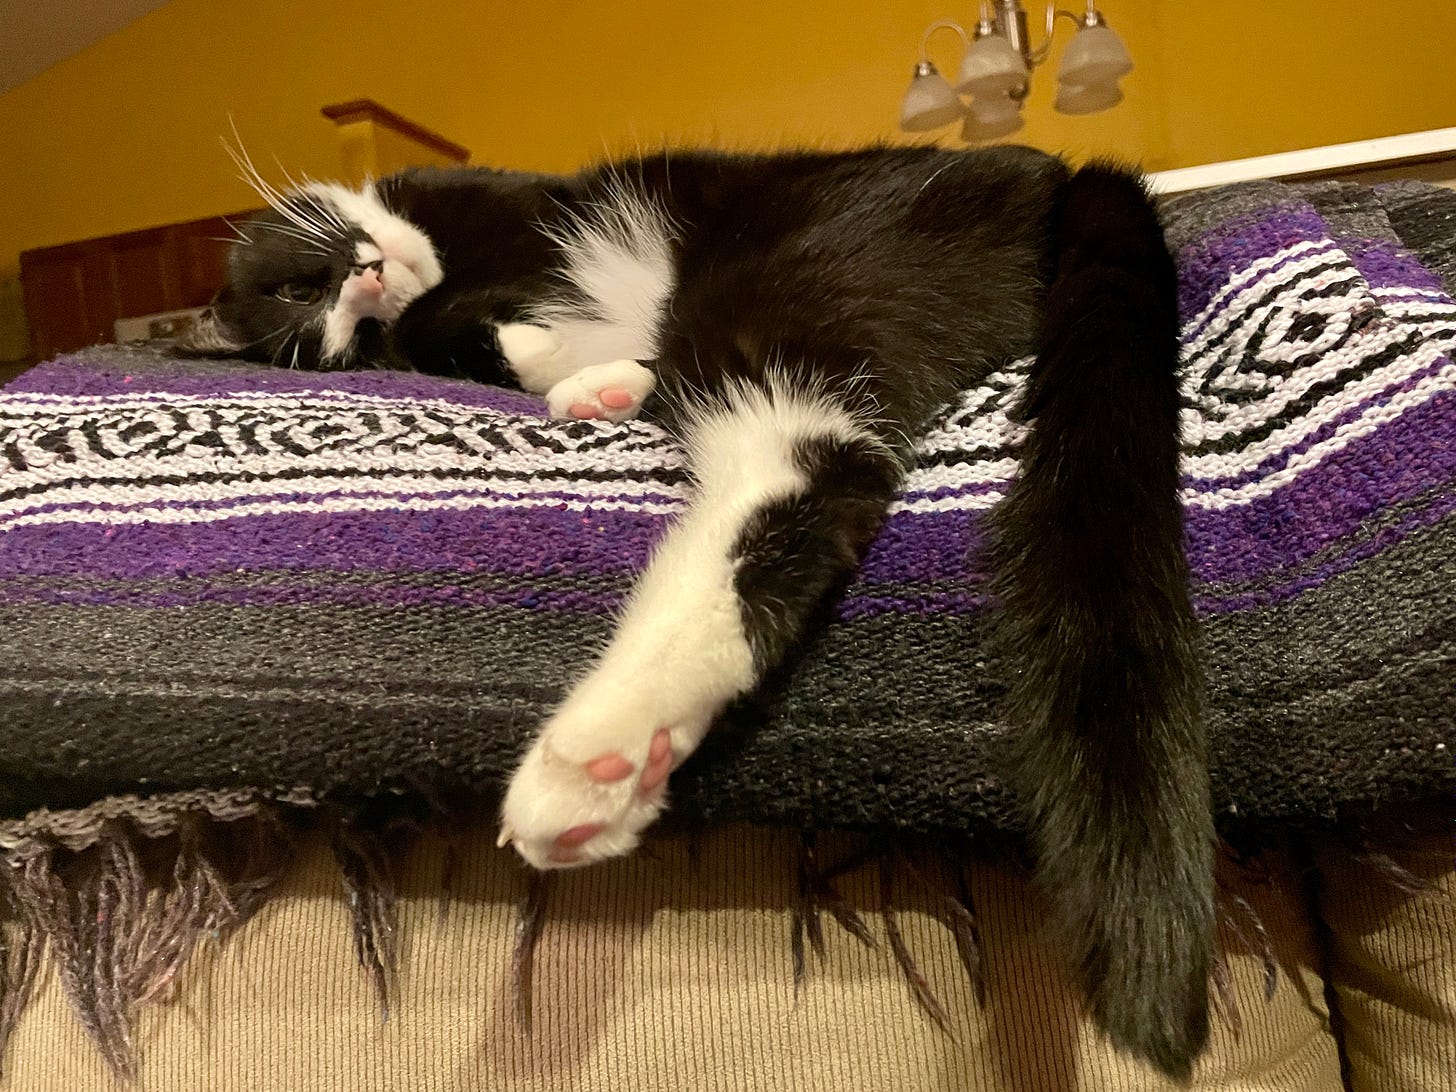 A tuxedo cat is lying on a multicolored blanket on the back of a couch. He appears to be melting, with one hind leg drooping down the couch cushion. His head is upside down, and he has one eye open.